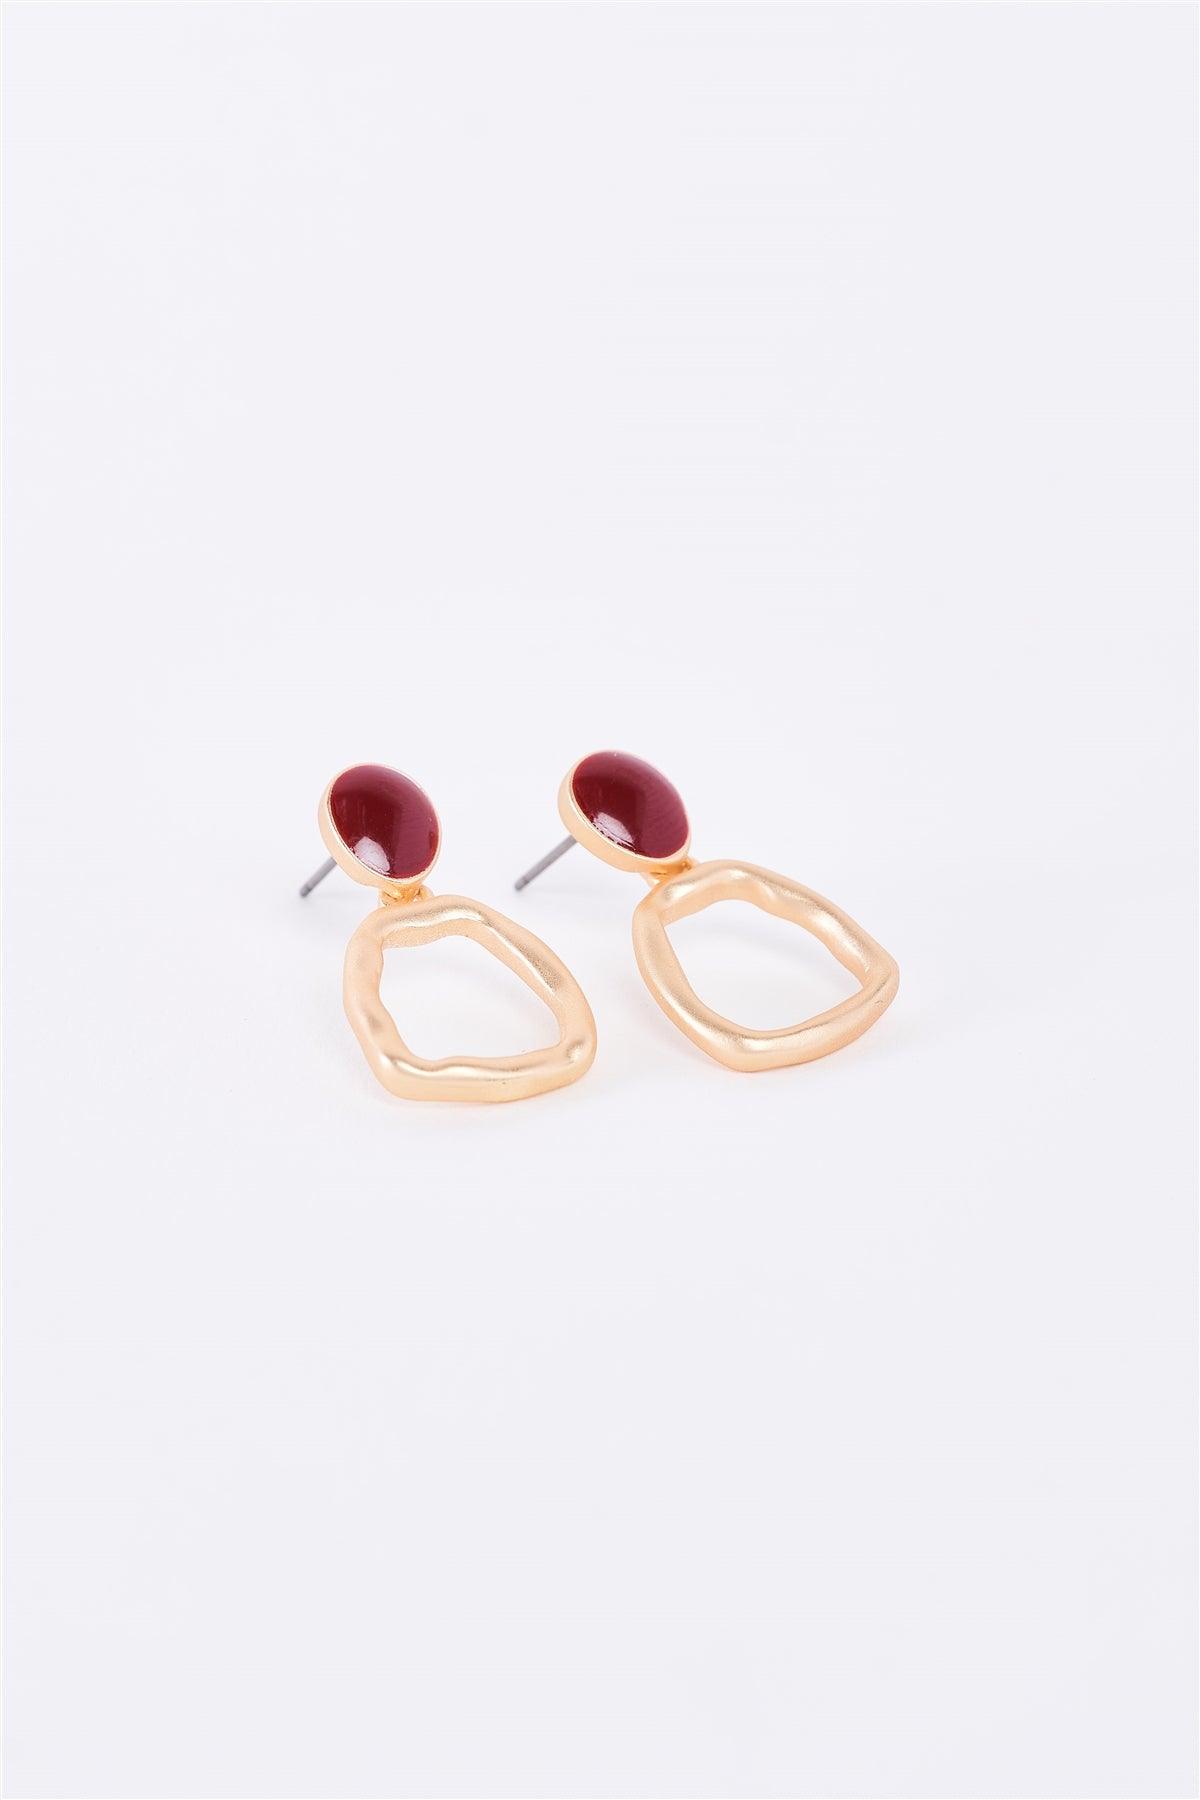 Matte Gold & Red Stone Drop Earrings /3 Pieces